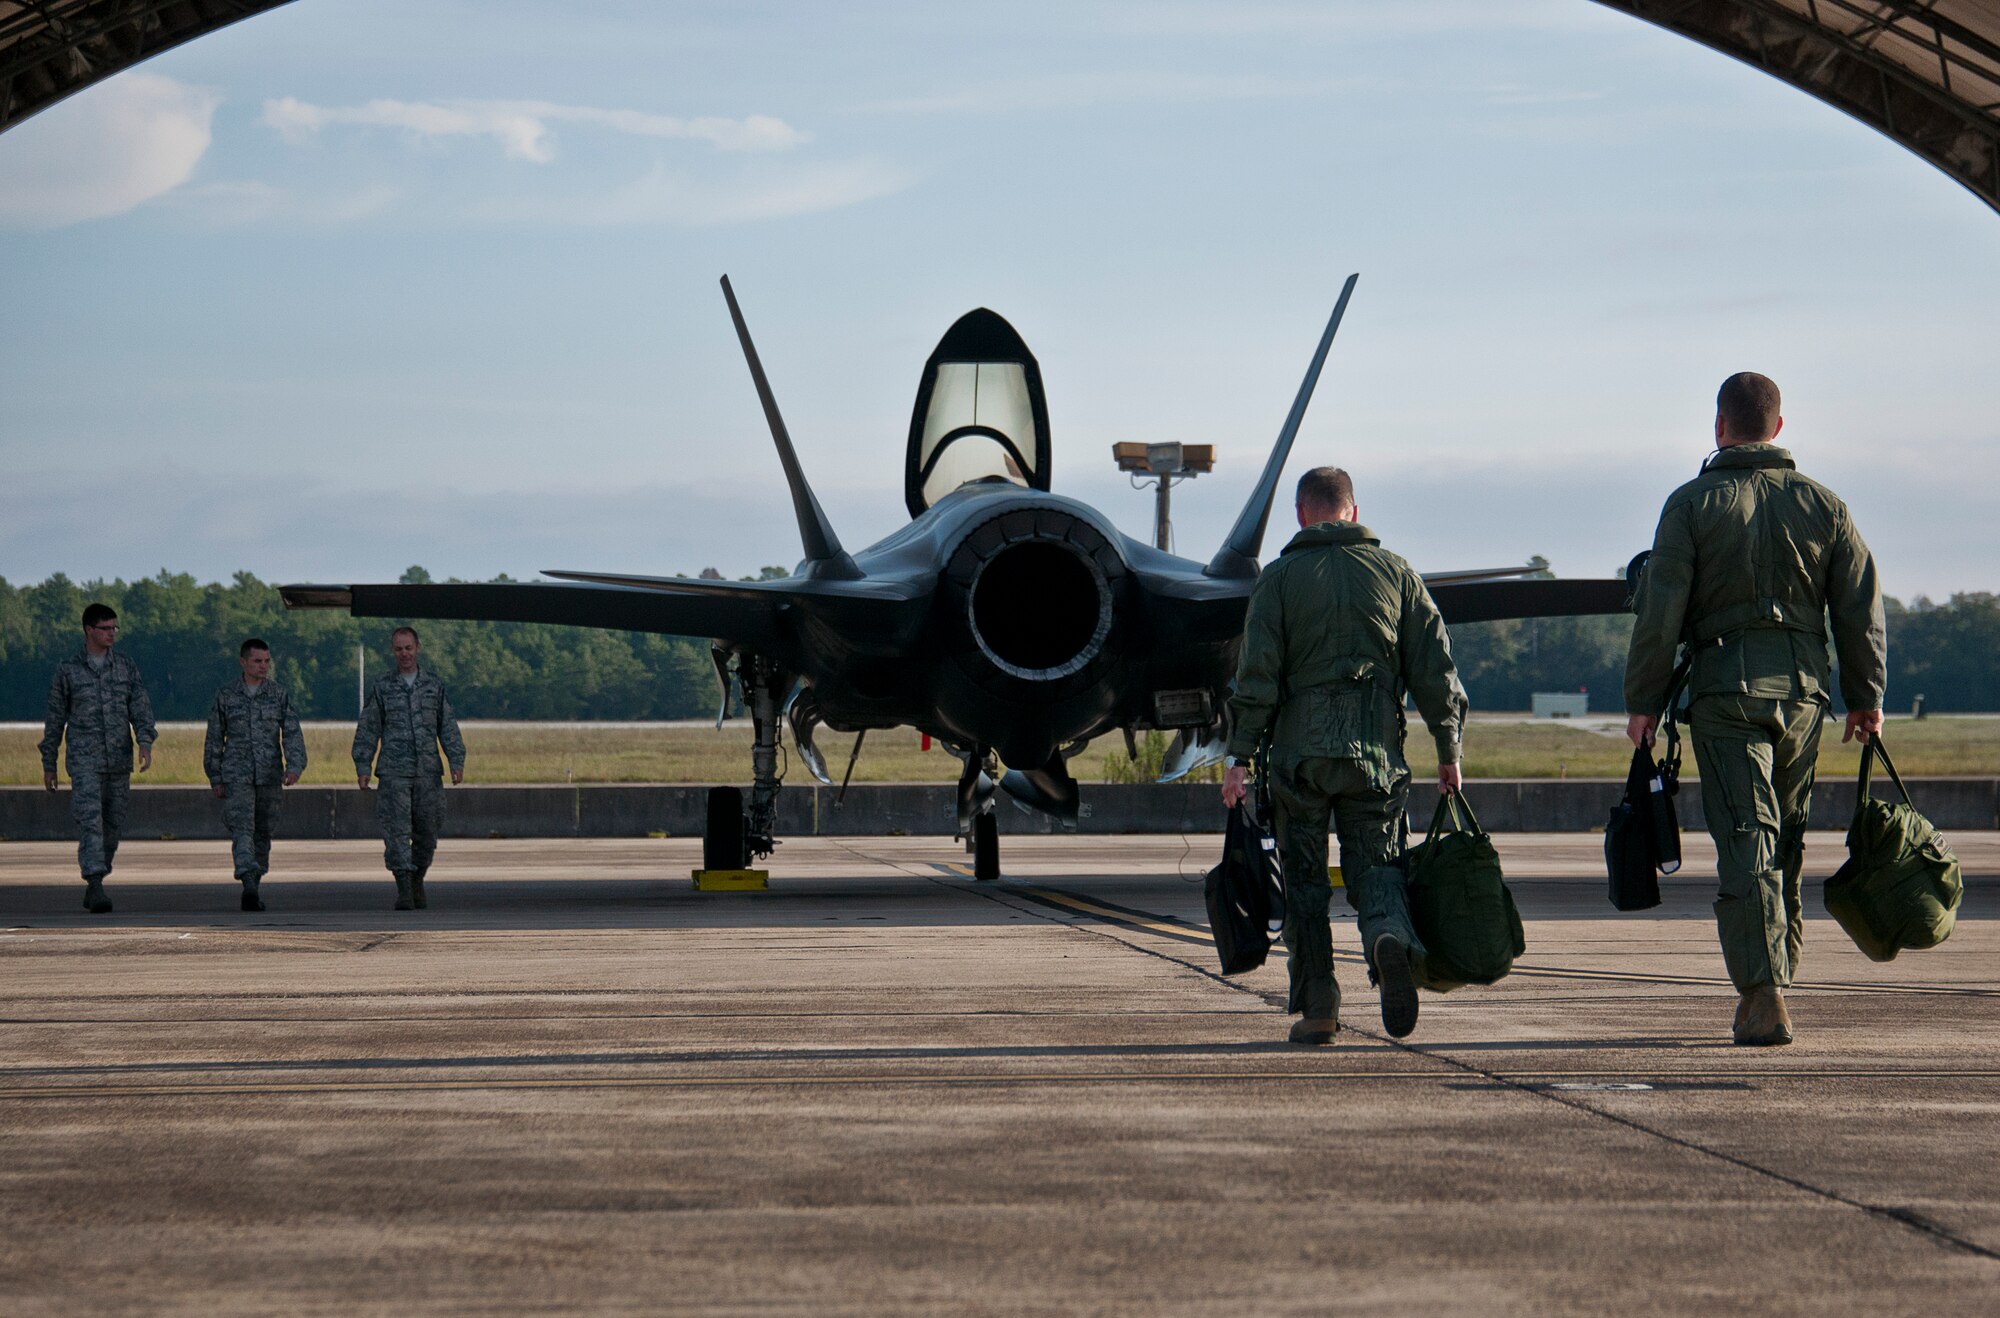 Maj. Gen. Jay Silveria, U. S. Air Force Warfare Center commander, walks out to his F-35A Lightning II with Lt. Col. Matt Renbarger, the 58th Fighter Squadron commander, before his final qualification flight Sept. 26 at Eglin Air Force Base, Fla.  Silveria became the first general officer in the Department of Defense to qualify in the fifth generation fighter.  He completed his training with back-to-back flights and hot pit refueling.  (U.S. Air Force photo/Samuel King Jr.)